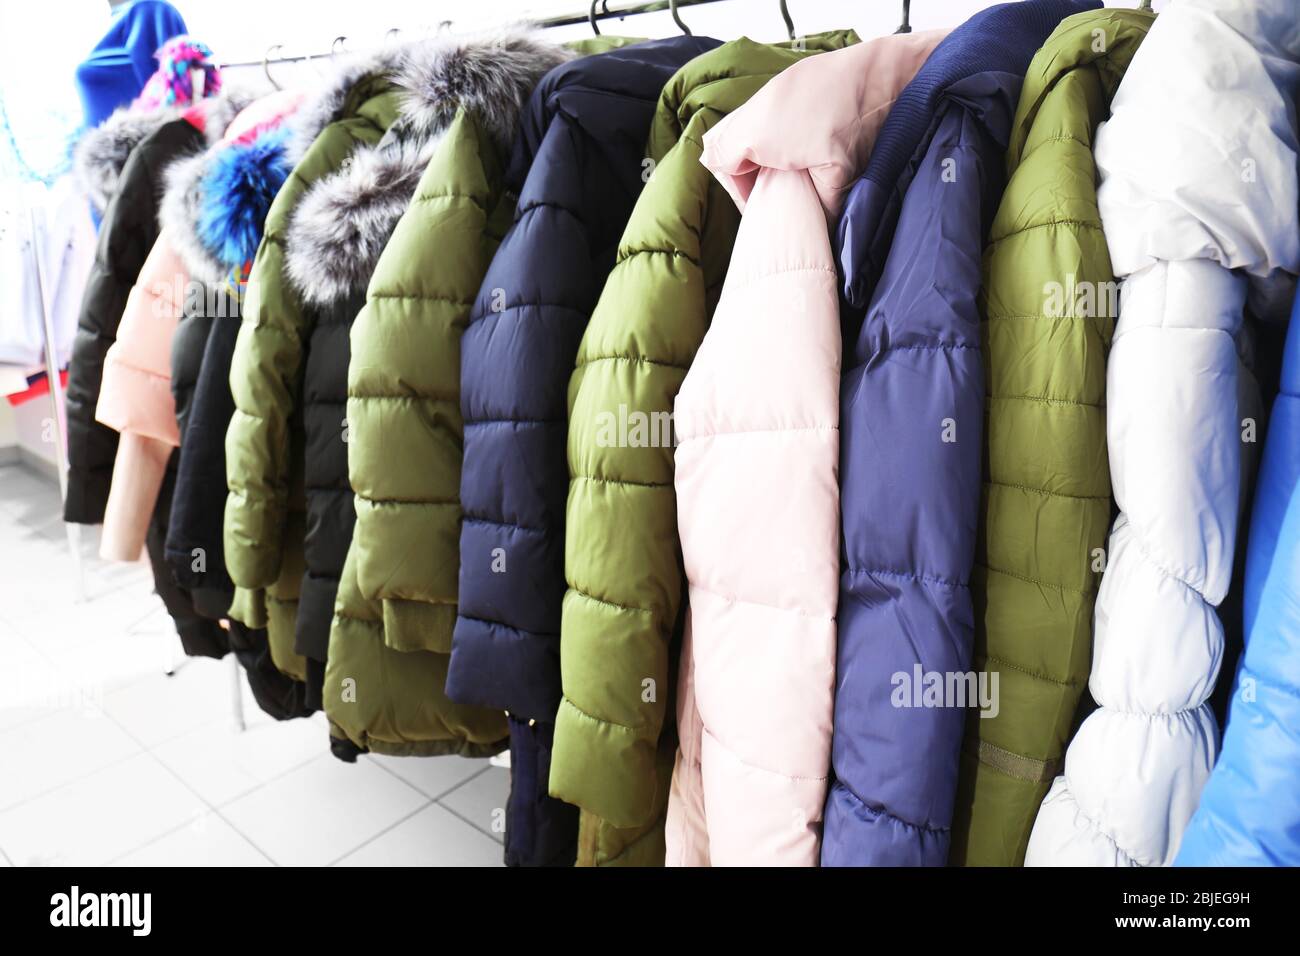 Winter clothes on hangers in modern shop Stock Photo - Alamy